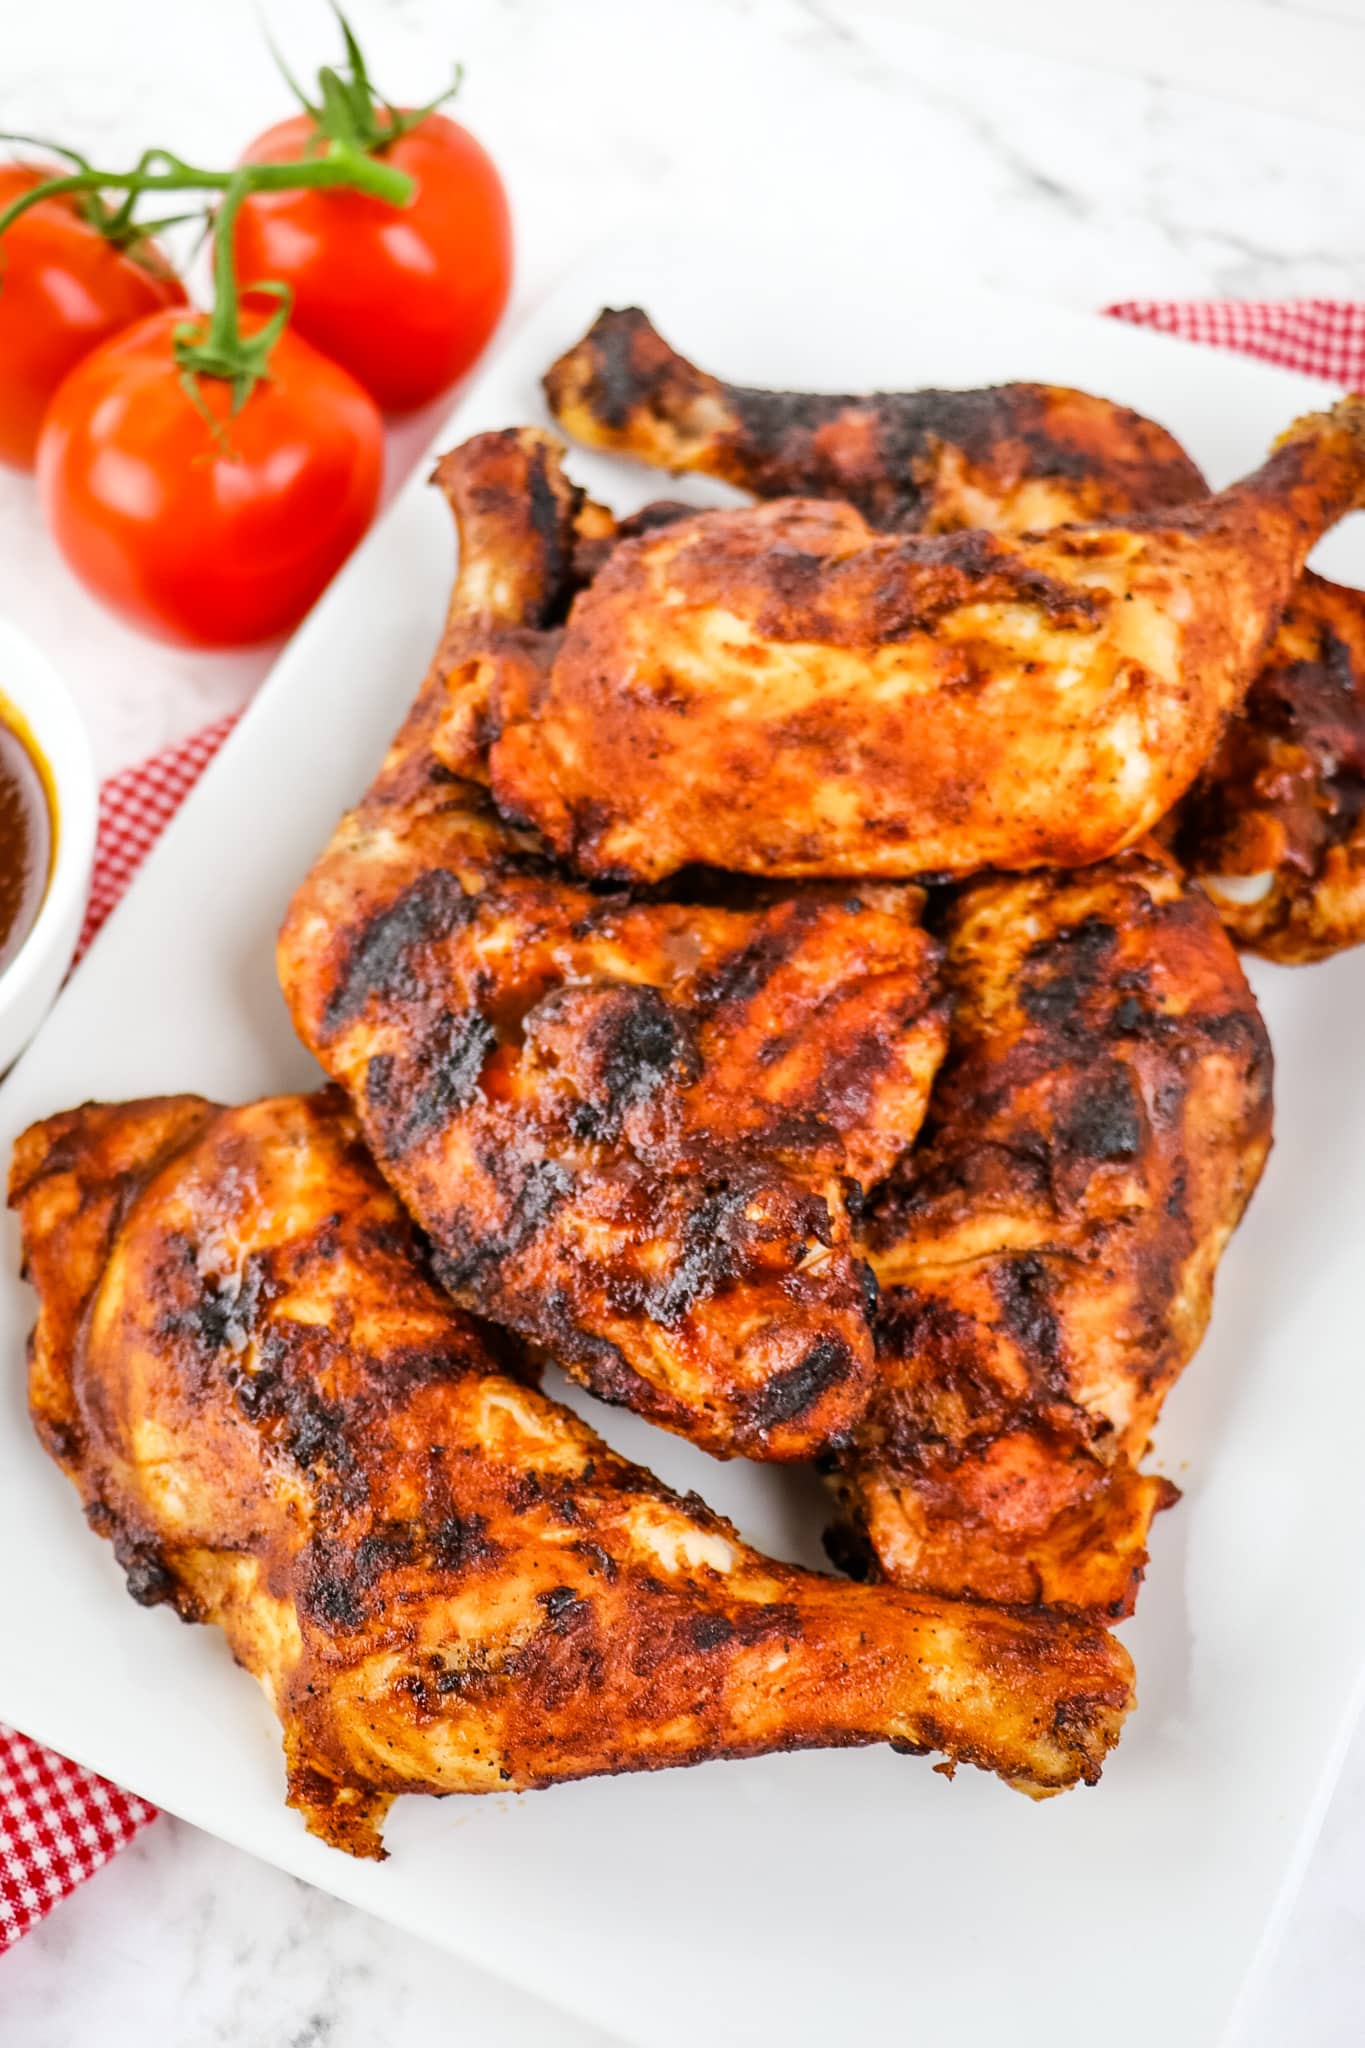 Grilled chicken quarters on a white platter.